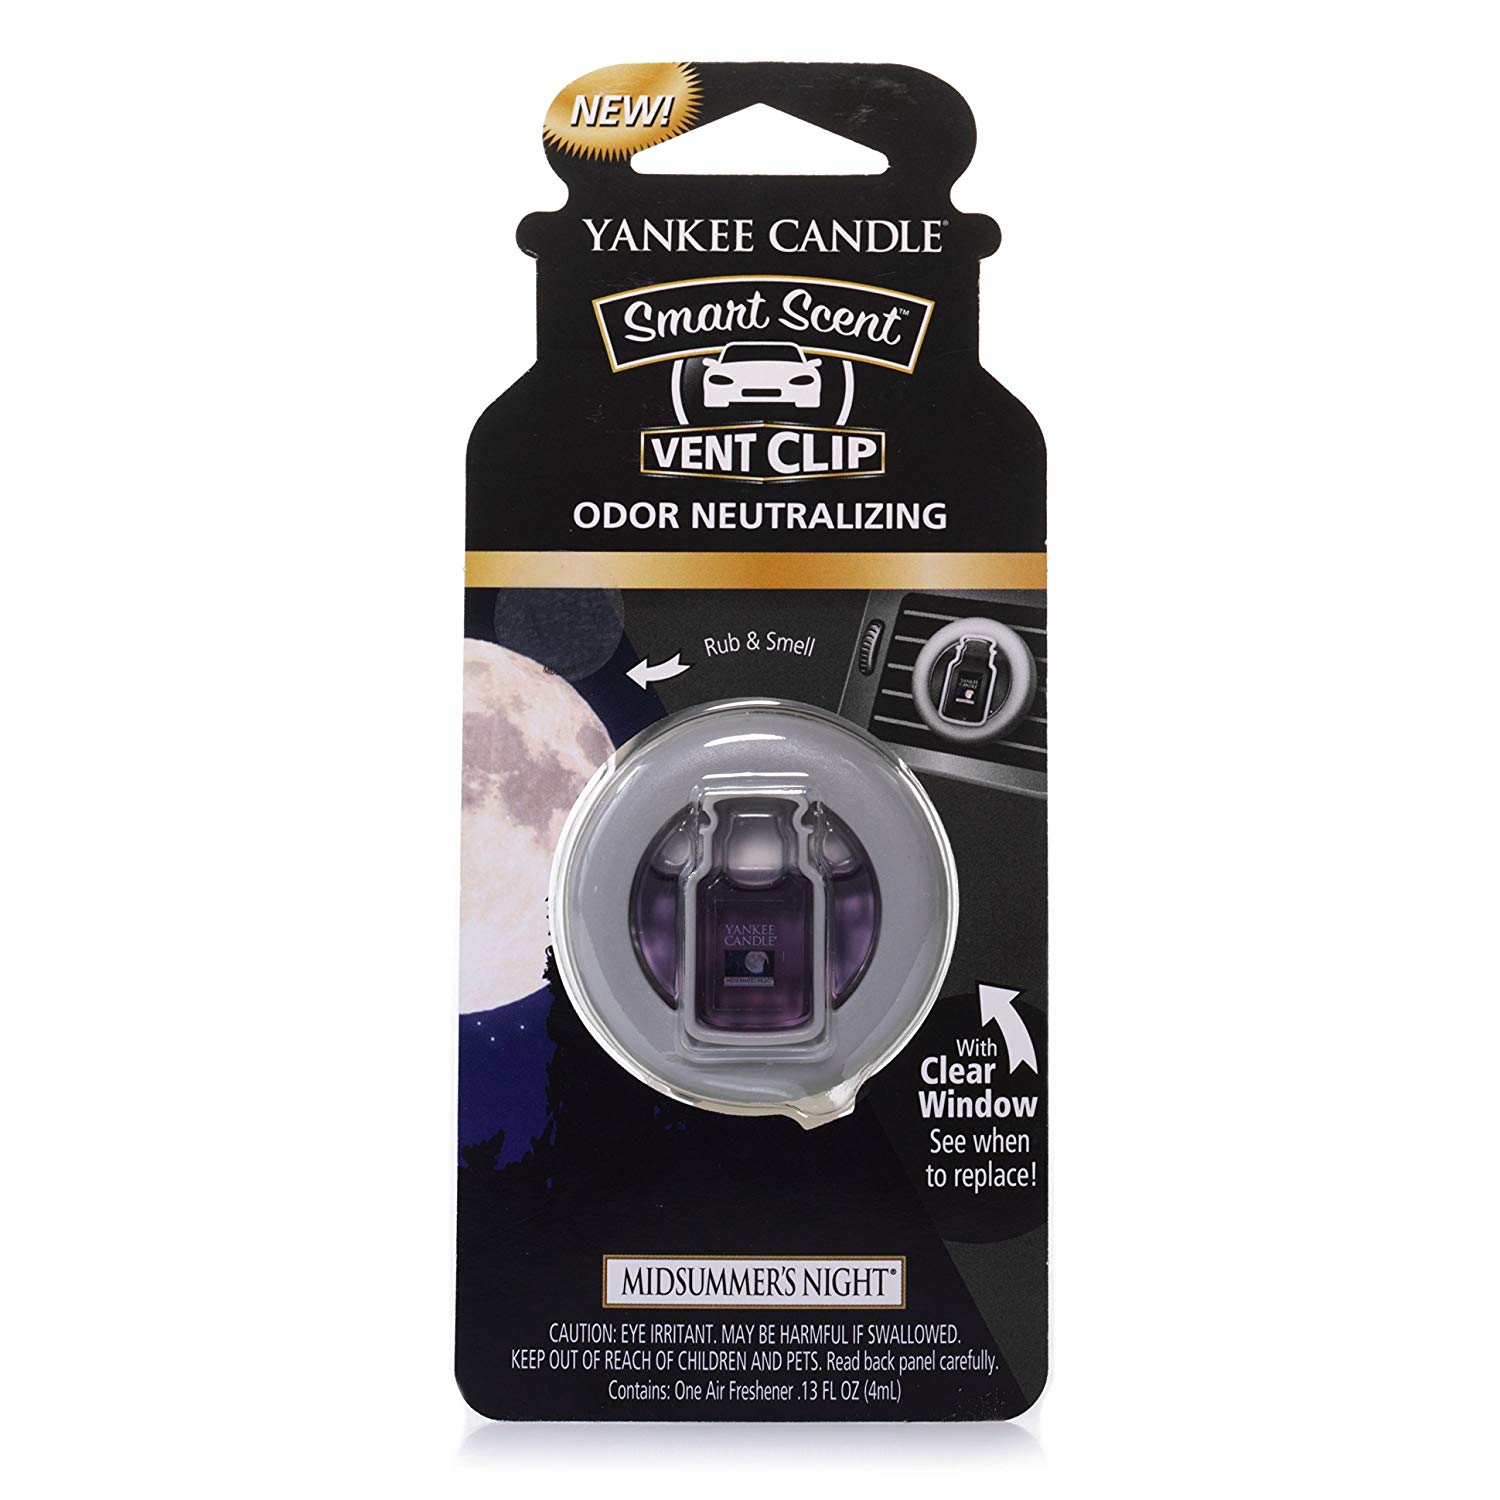 1304390: SMART SCENT VENT CLIP AIR FRESHENER - MIDSUMMER'S NIGHT - YANKEE CANDLE